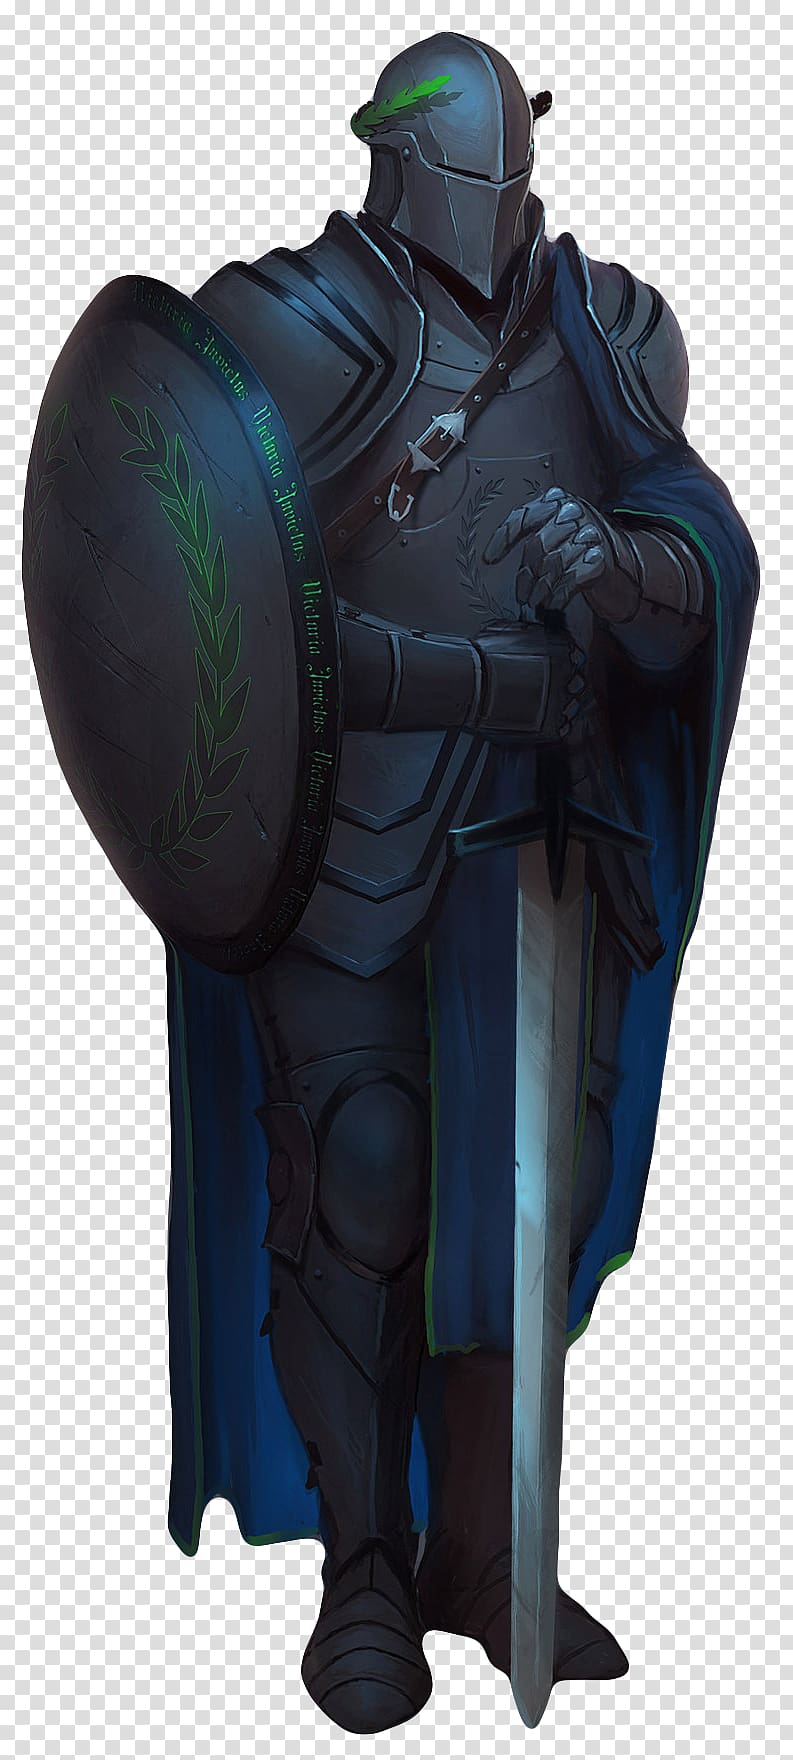 Knight Concept art Dungeons & Dragons Fantasy, knight transparent background PNG clipart